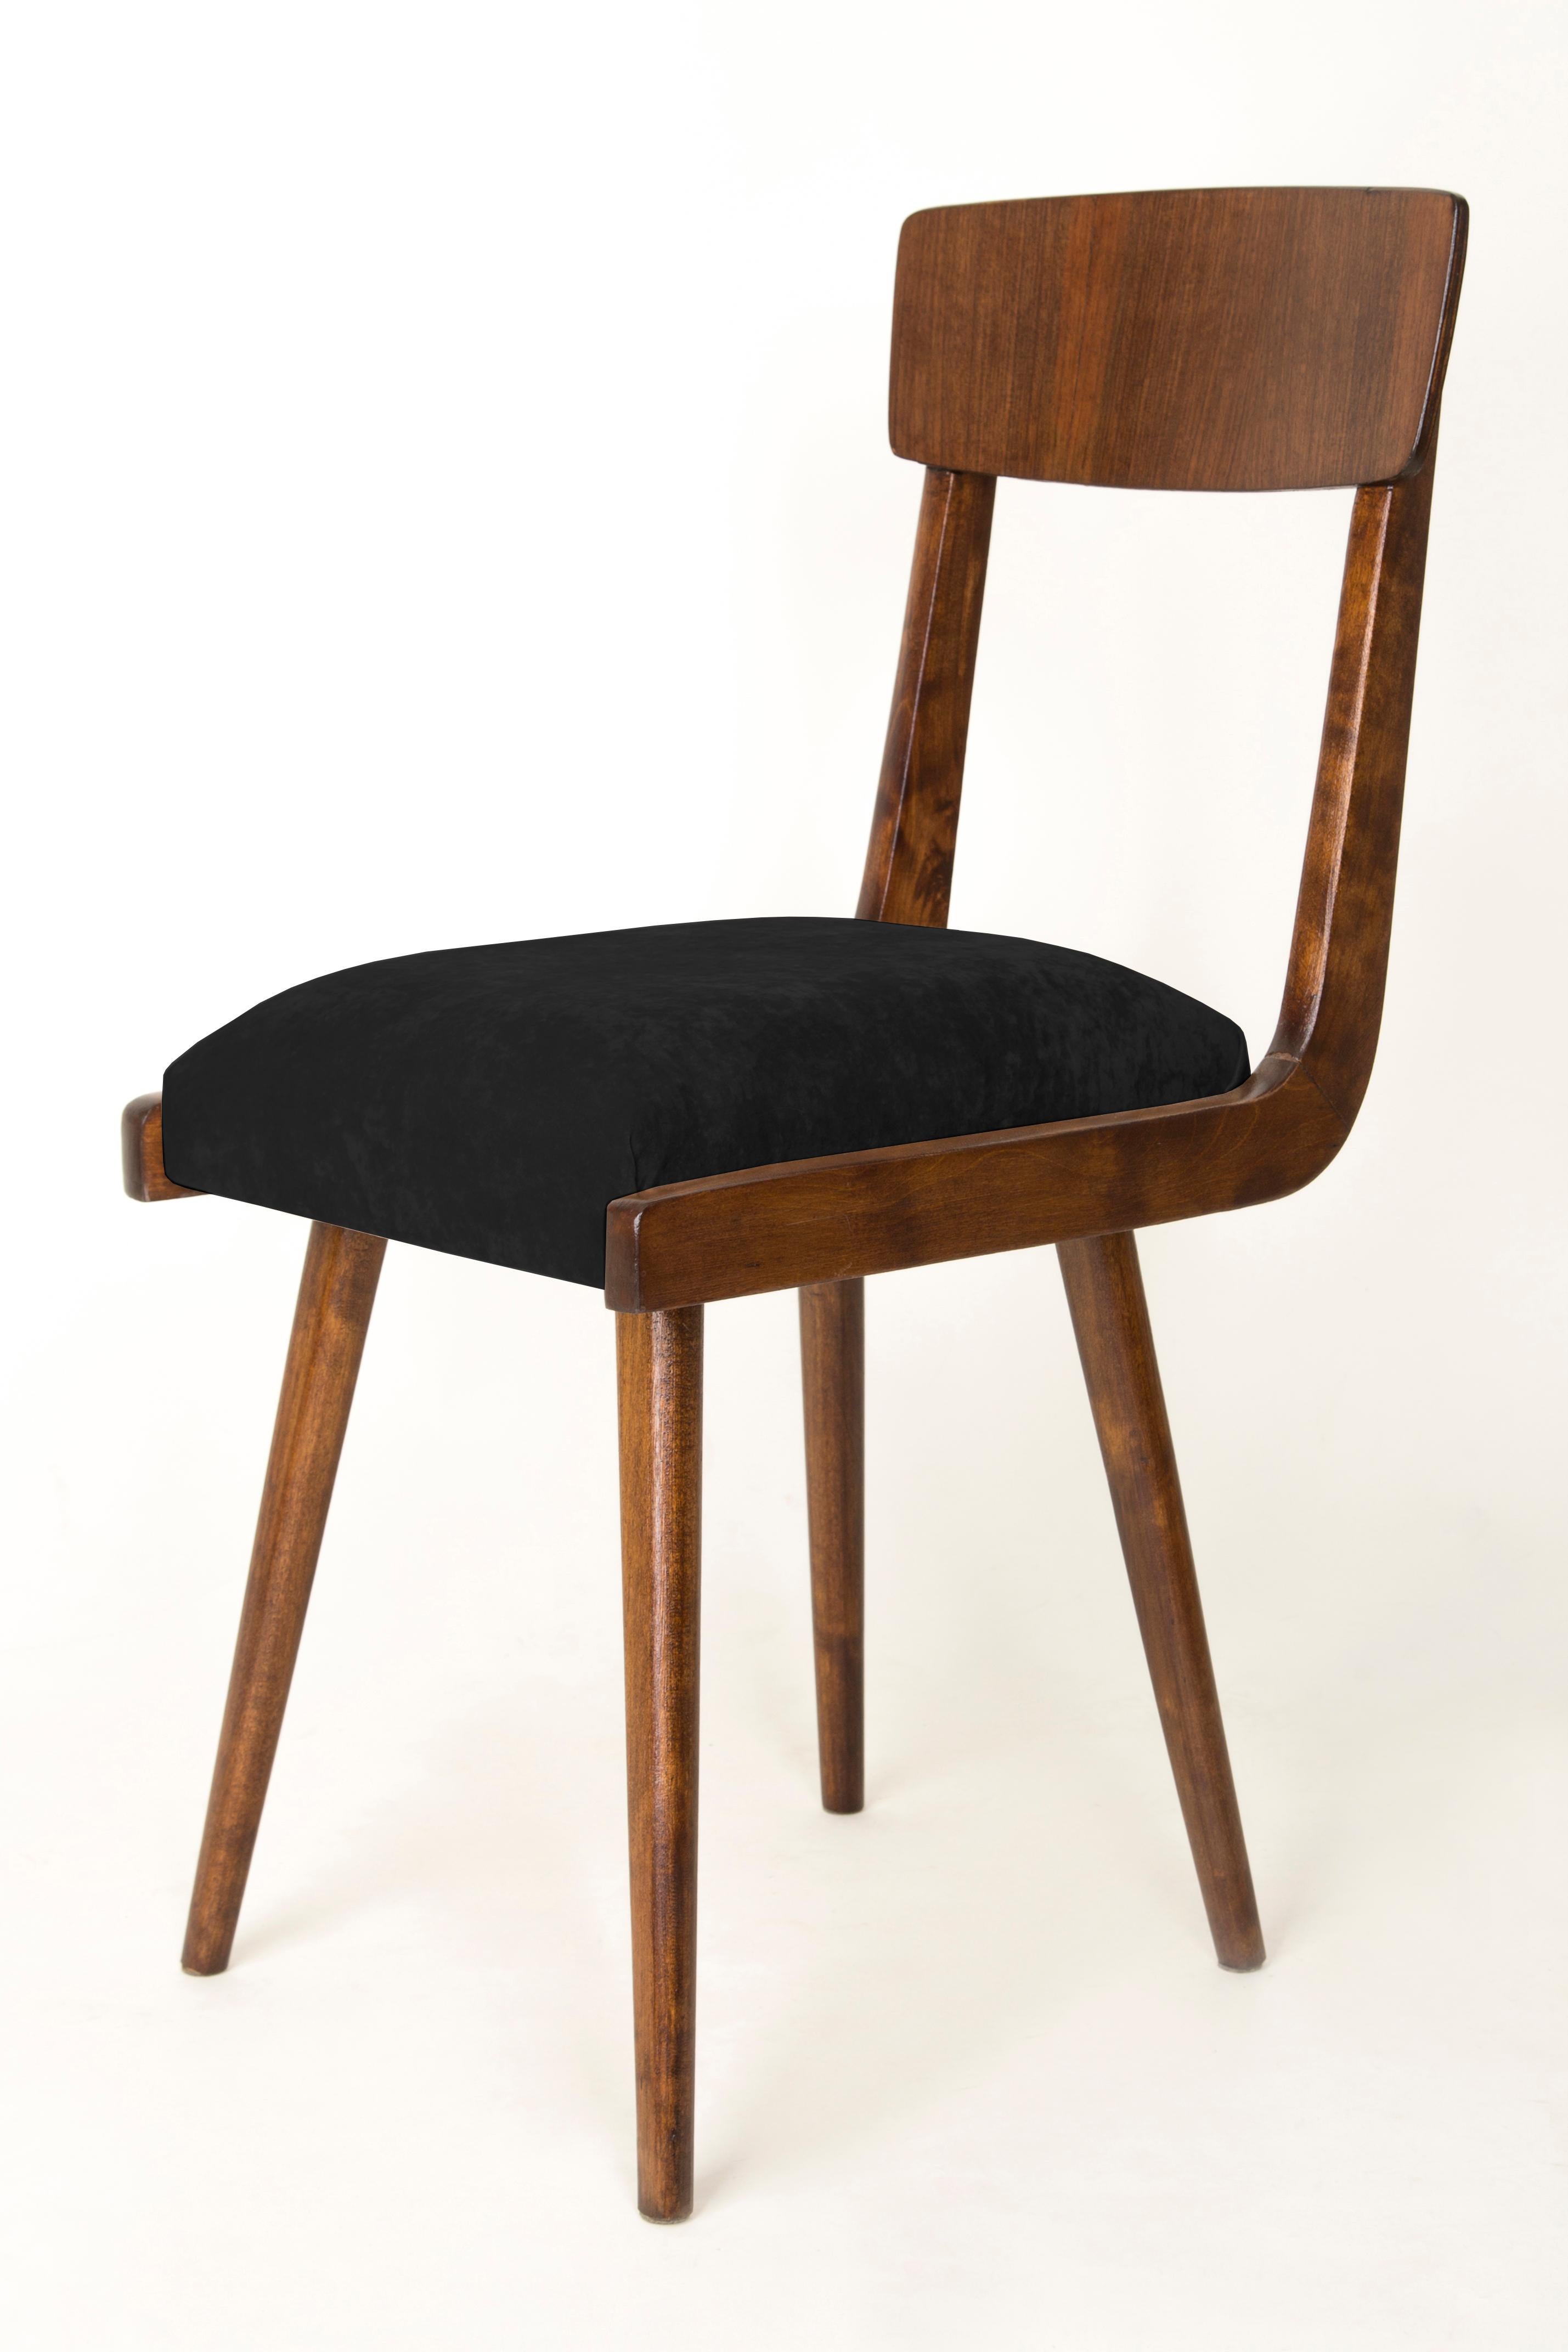 Polish Set of Four 20th Century Black Wood Chairs, 1960s For Sale